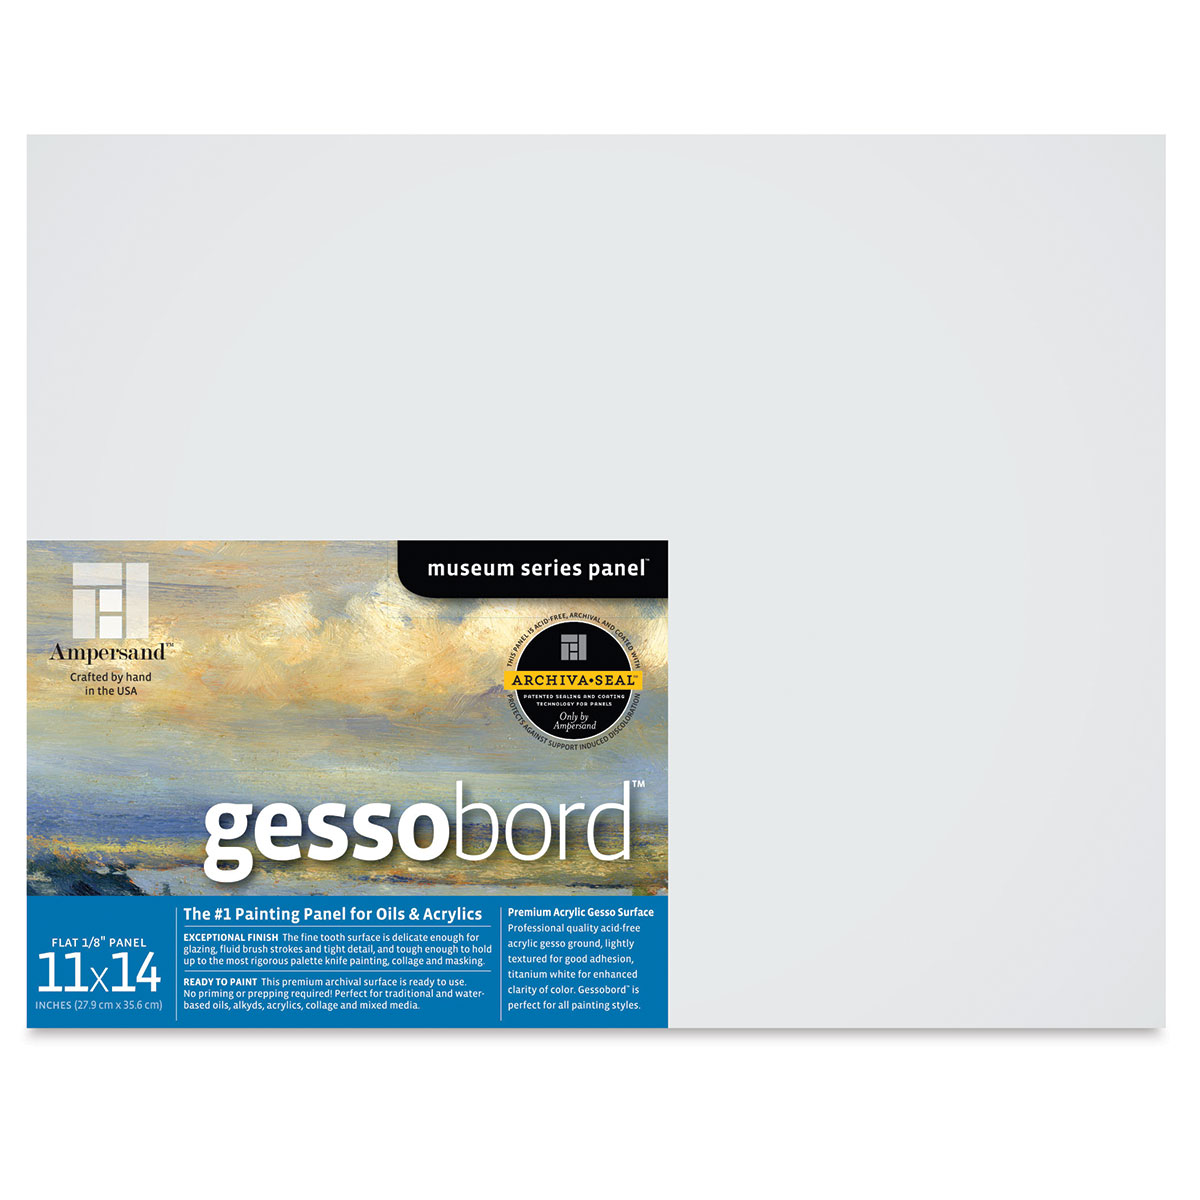 Ampersand Gessobord - The Best Surface for Oil and Acrylic Painting 